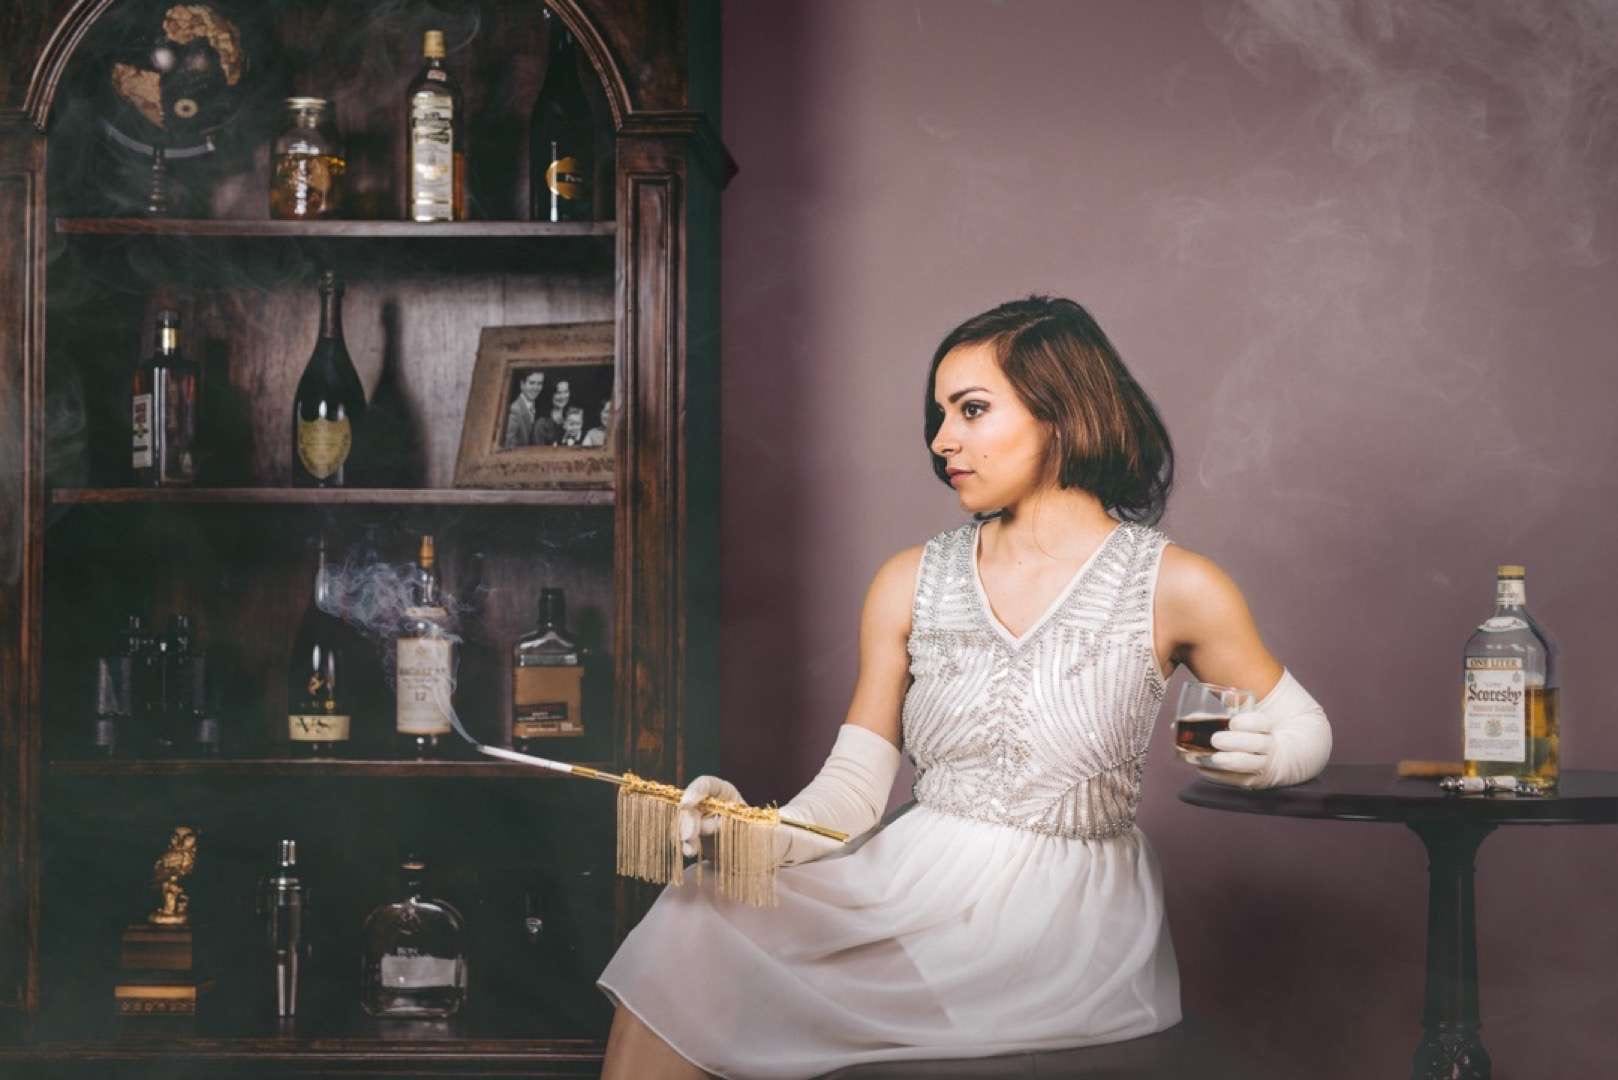 Woman in an old setting with a vintage cigarette posing for the camera with a glass of alcohol in her hand. There is a bottle of alcohol on the table nearby and a shelf with alcohol bottles and other items.